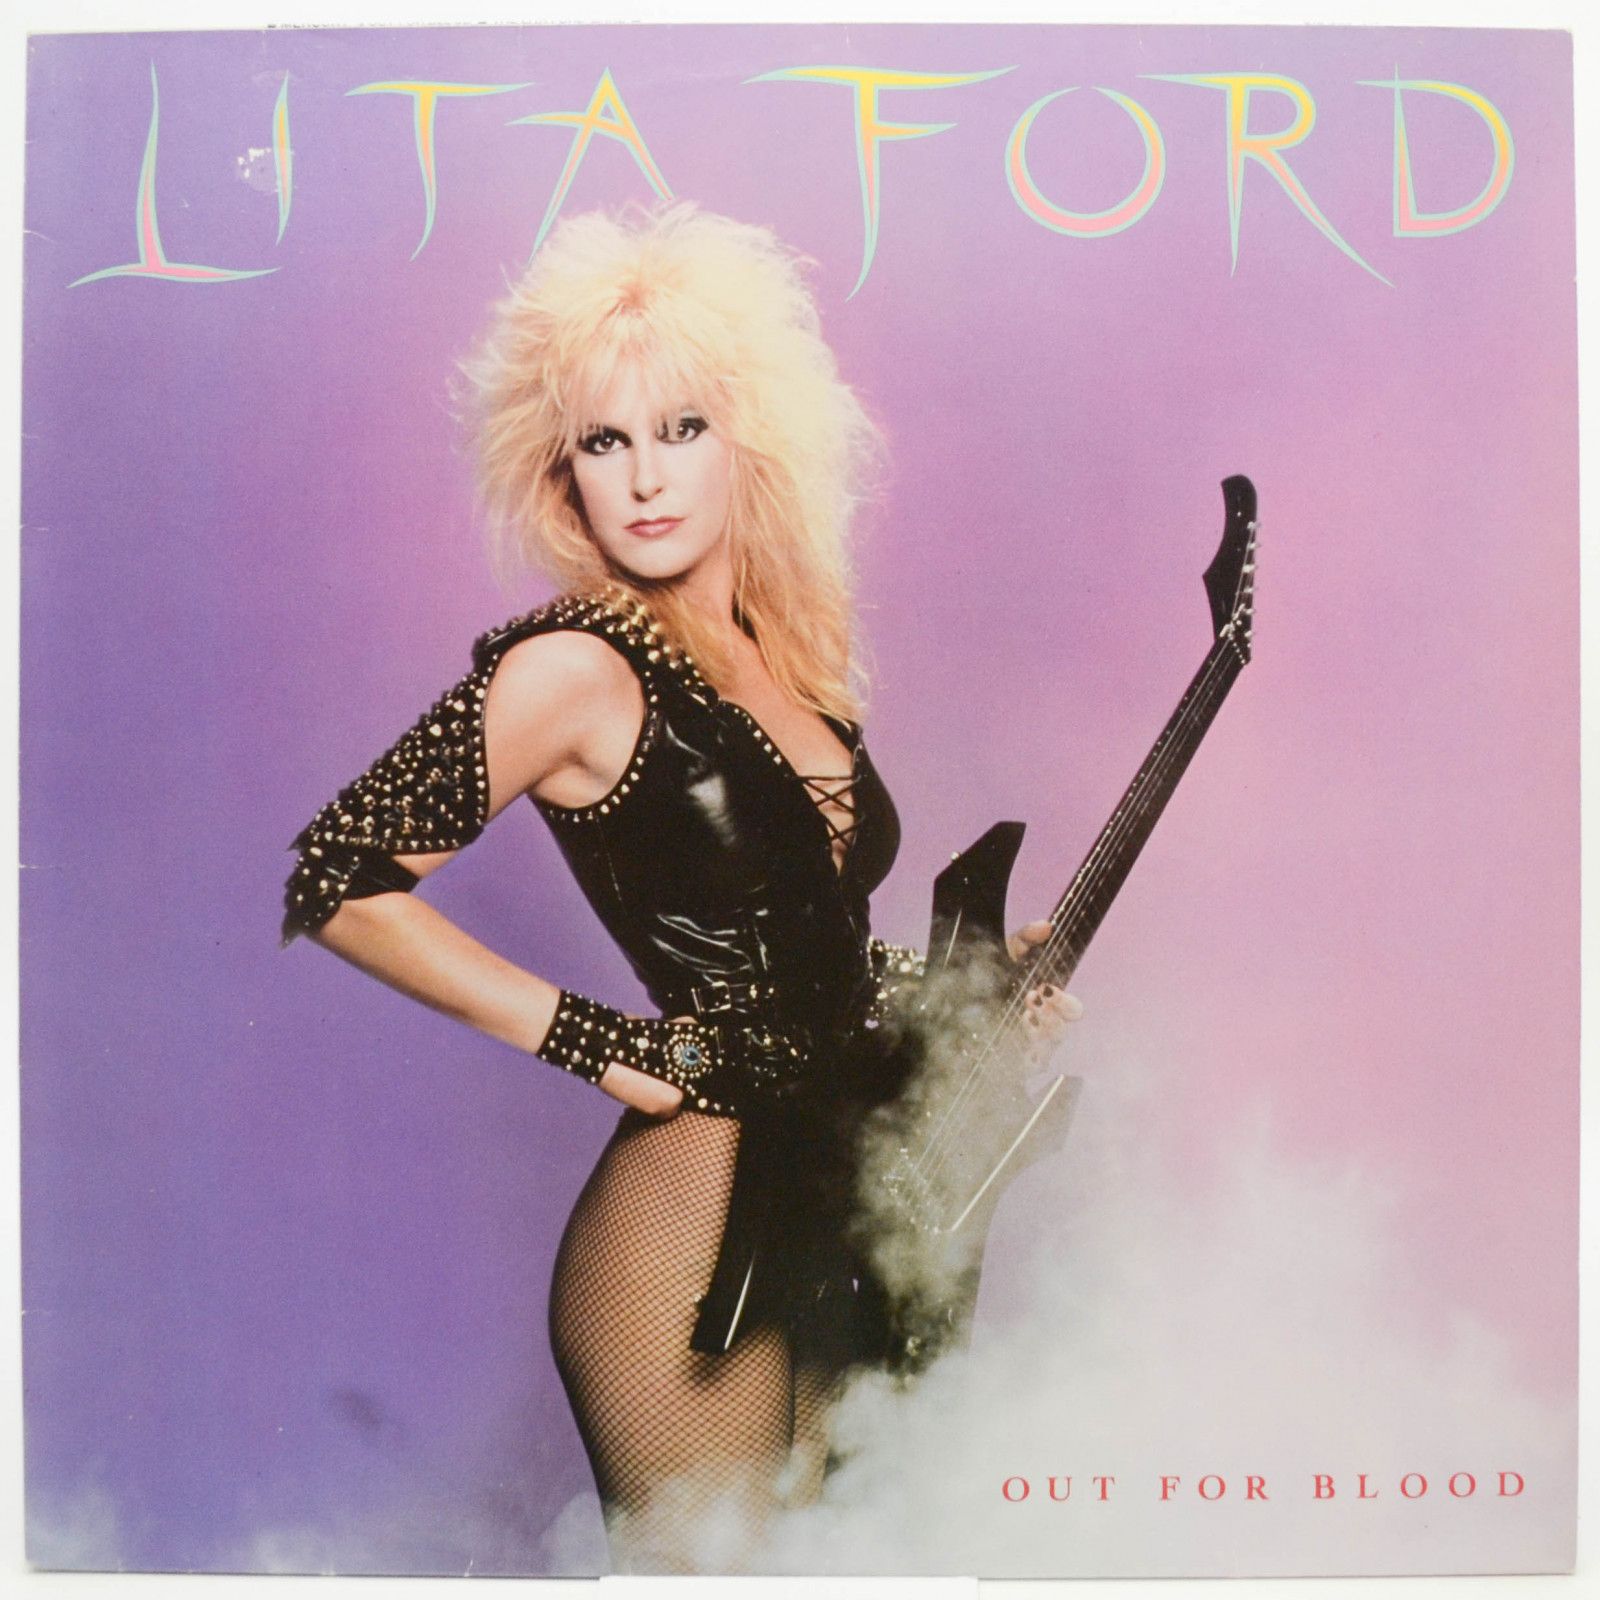 Lita Ford, The Lita Ford Band — Out For Blood, 1983